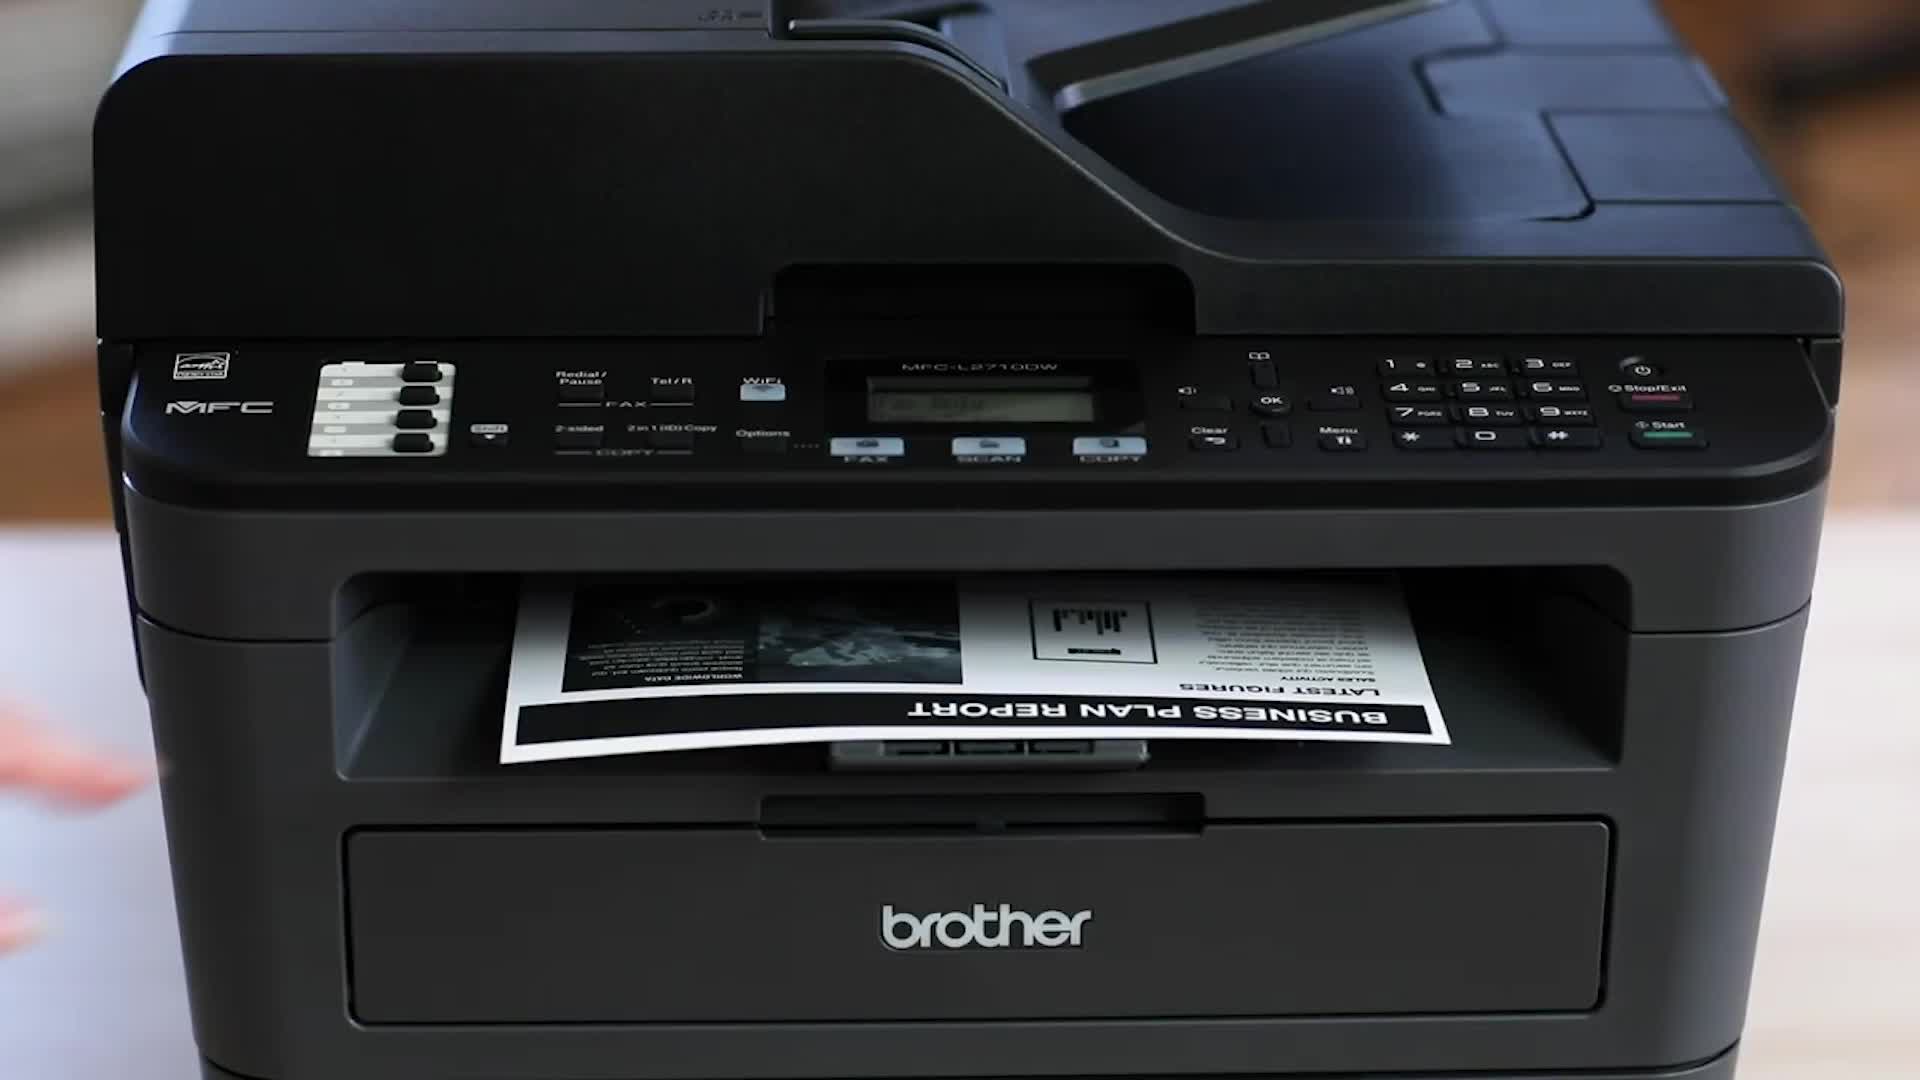 Brother Mfc J6720dw pas cher - Achat neuf et occasion